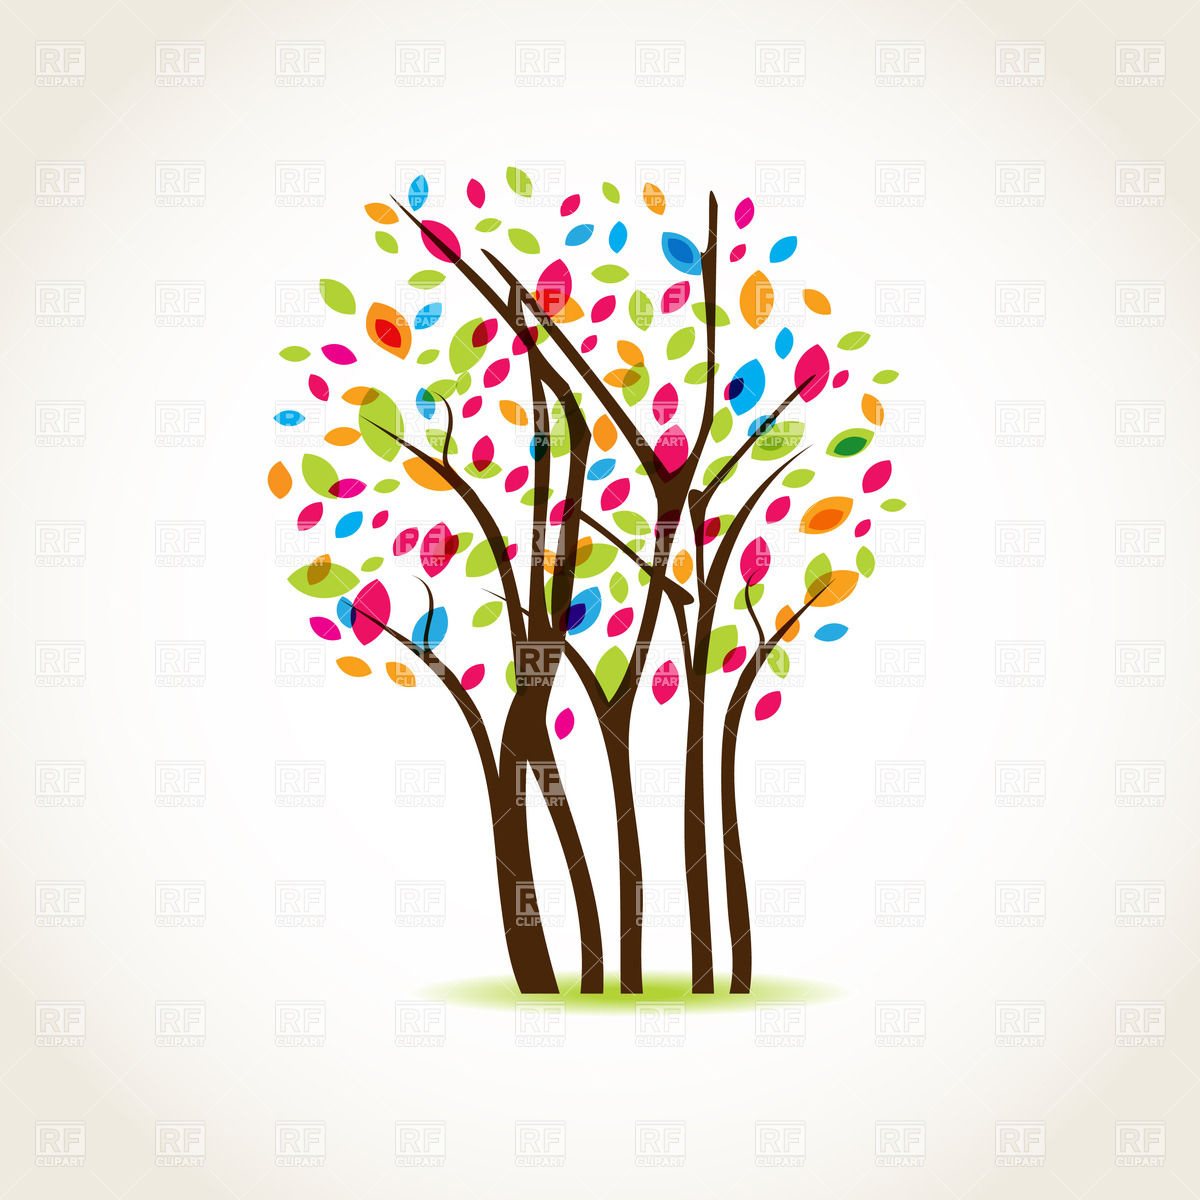 Spring Tree Covered With Colorful Leaves 23014 Download Royalty Free    